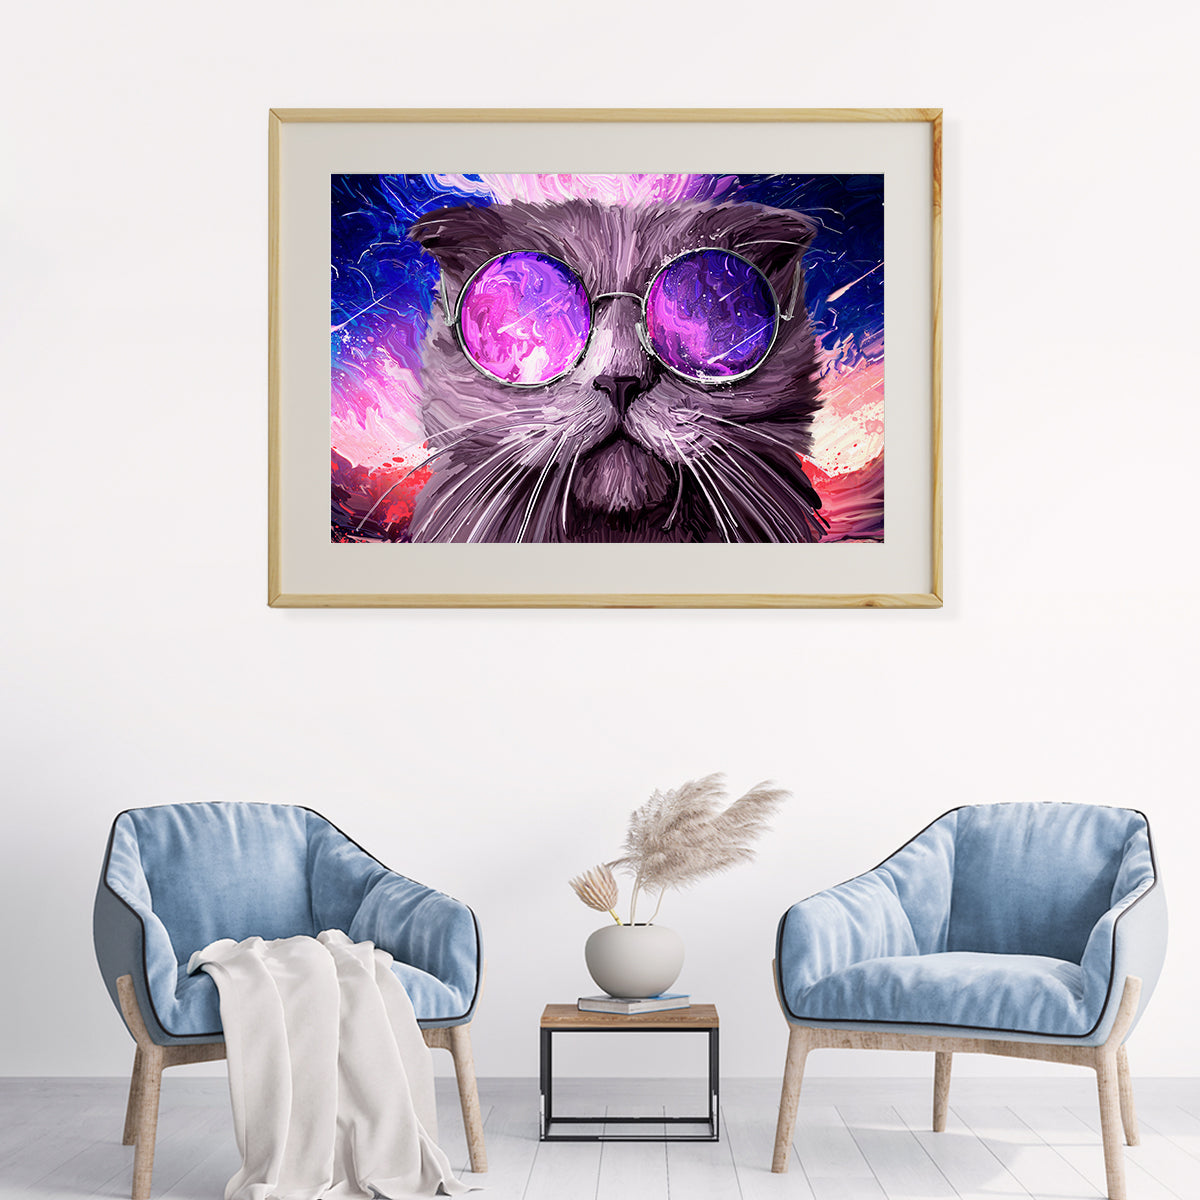 Cat in Round Glasses Modern Art Poster-Horizontal Posters NOT FRAMED-CetArt-10″x8″ inches-CetArt